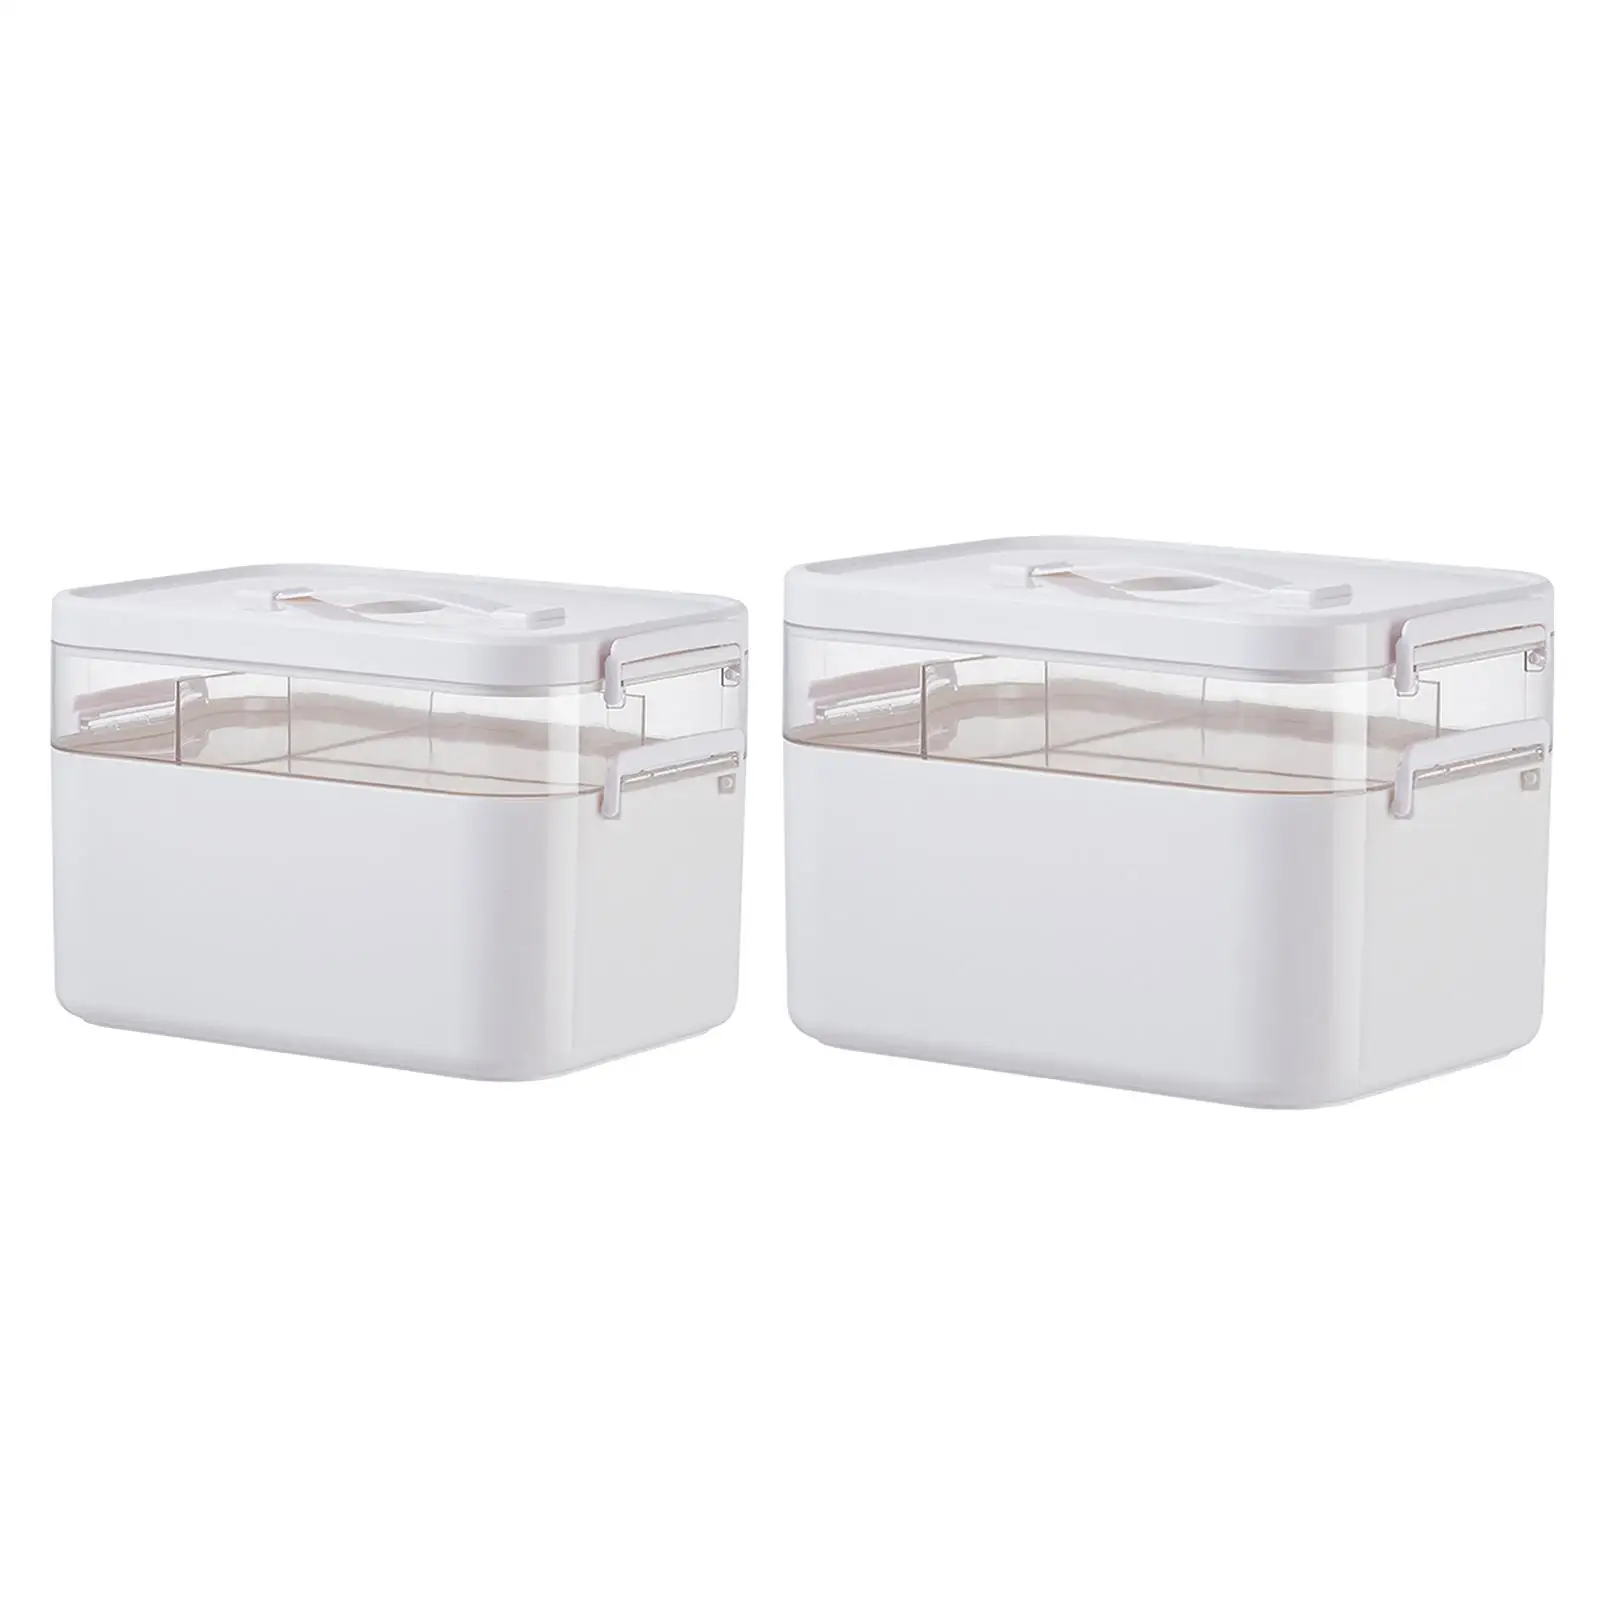 Family First Aid Medical Box Storage Box Bins with Handle Double Layer for Sewing Cosmetic Car Outdoor Activities Camping